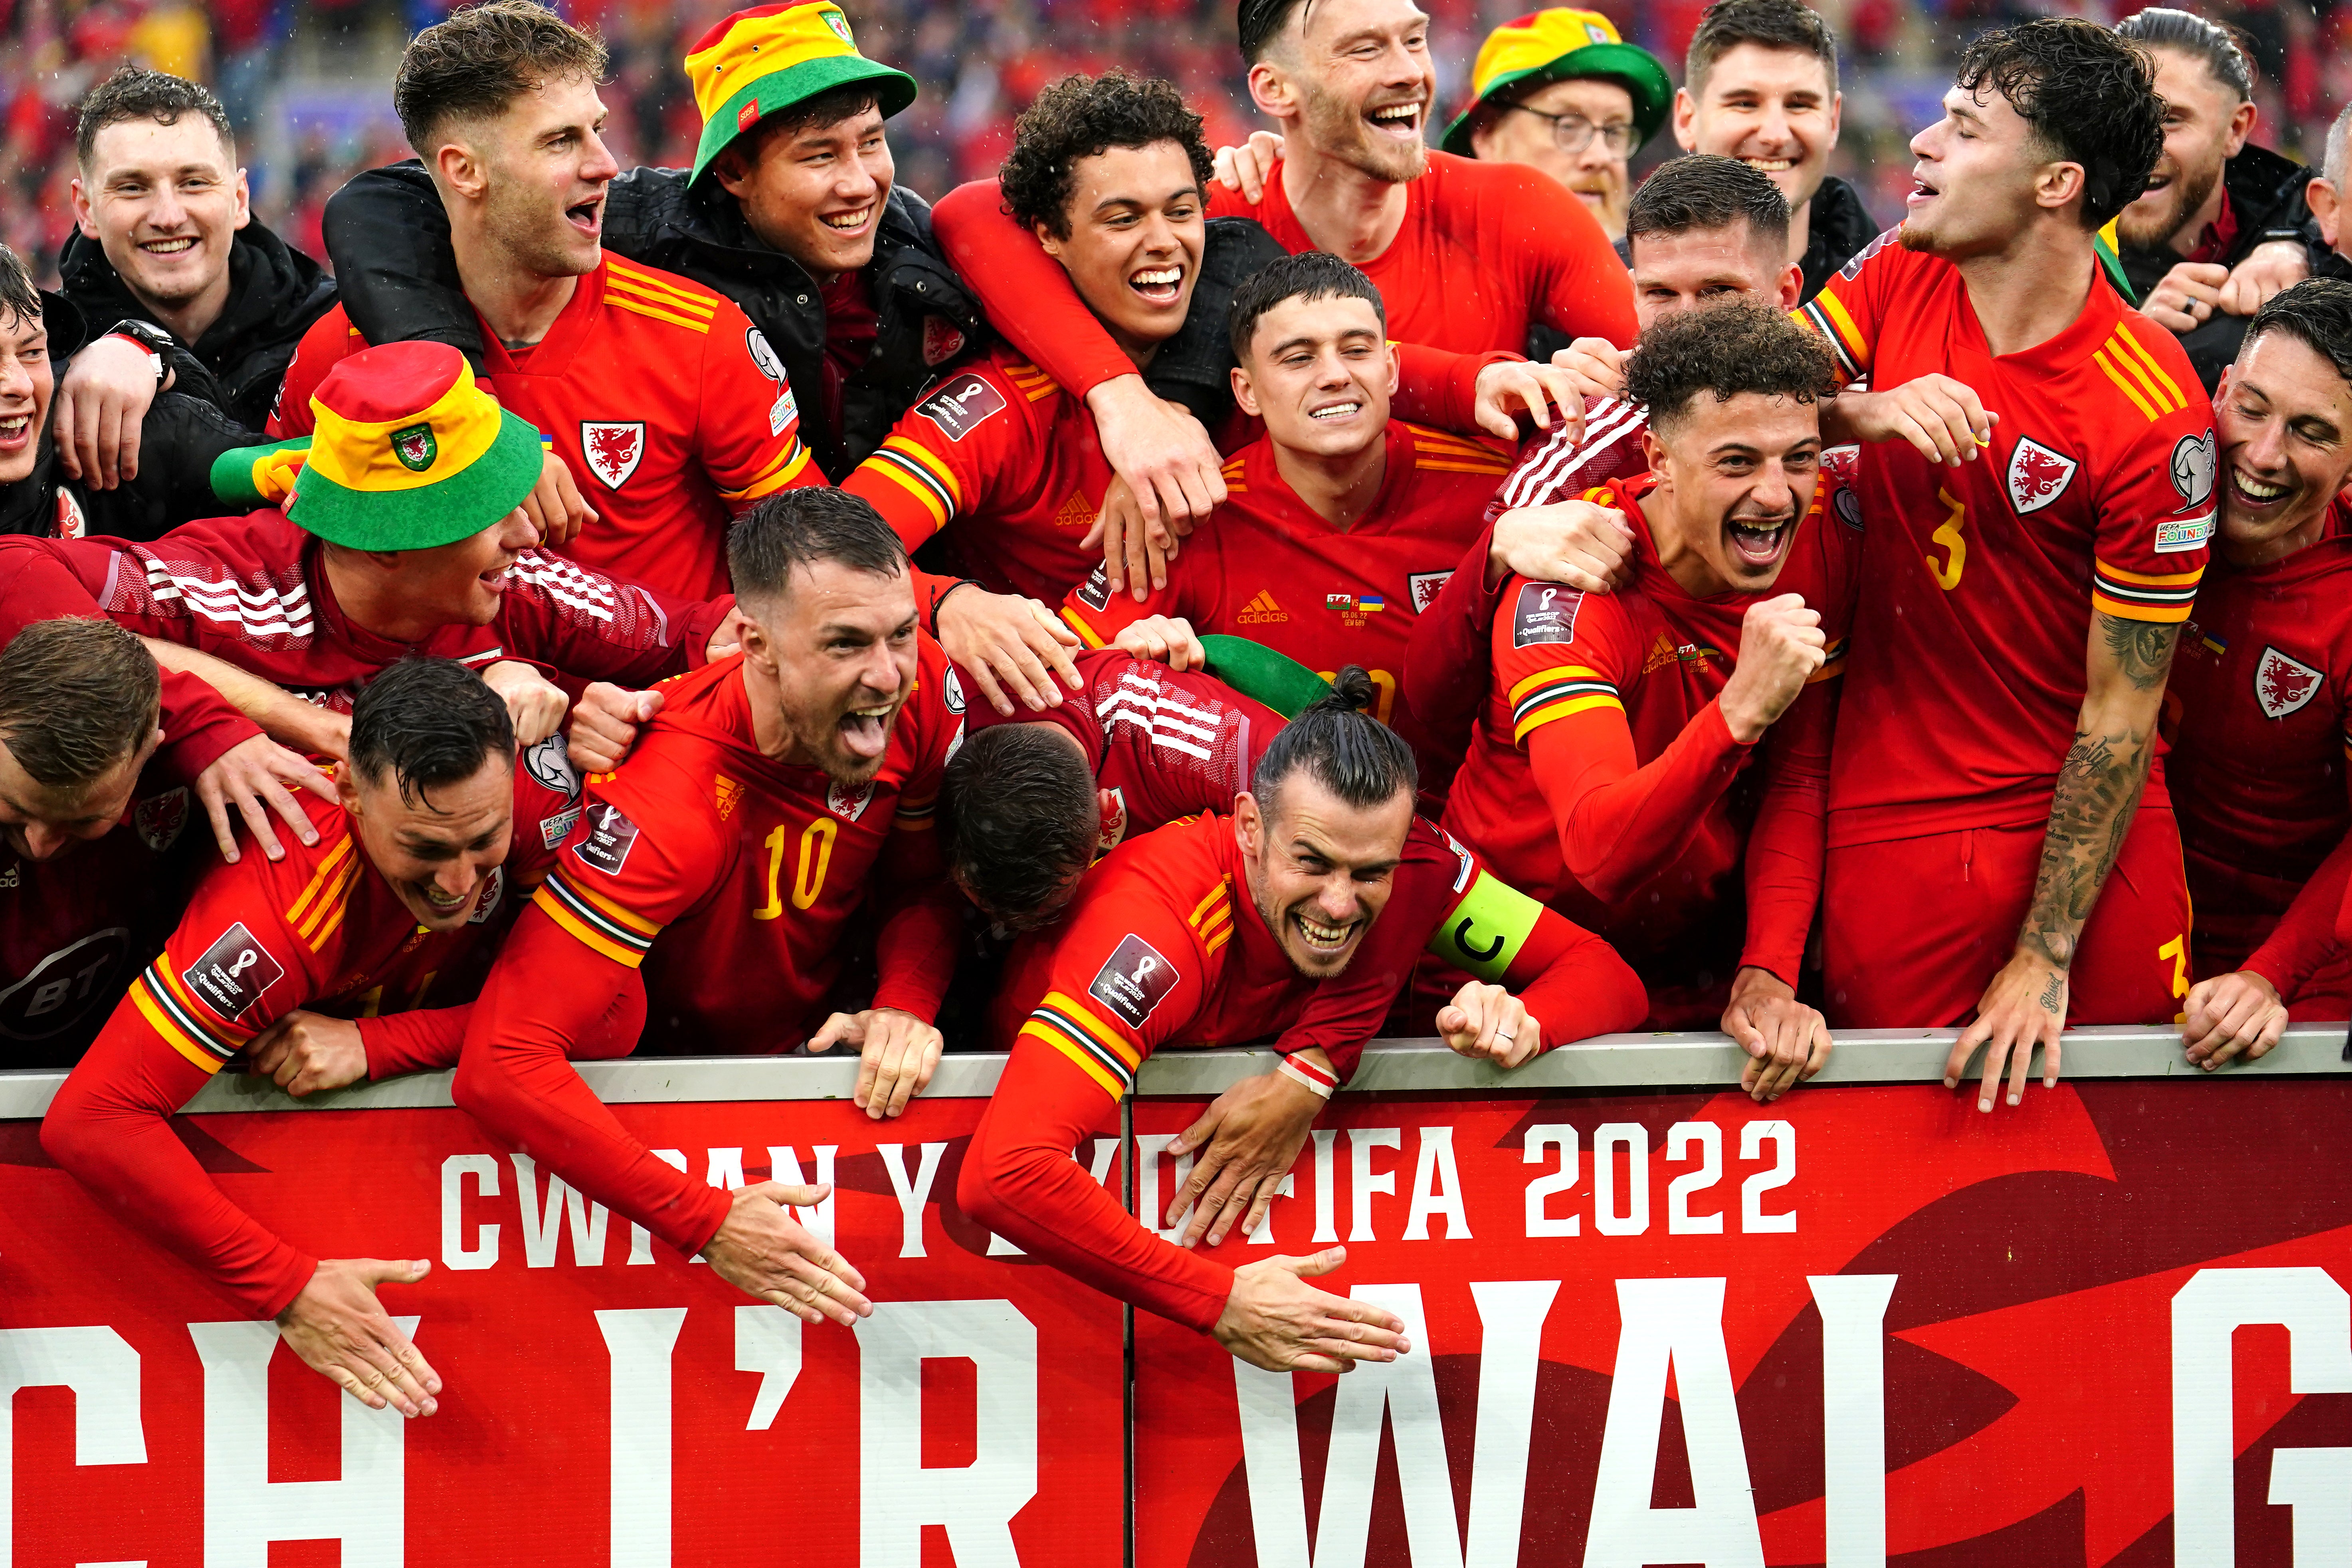 Wales celebrate their World Cup qualification (David Davies/PA)